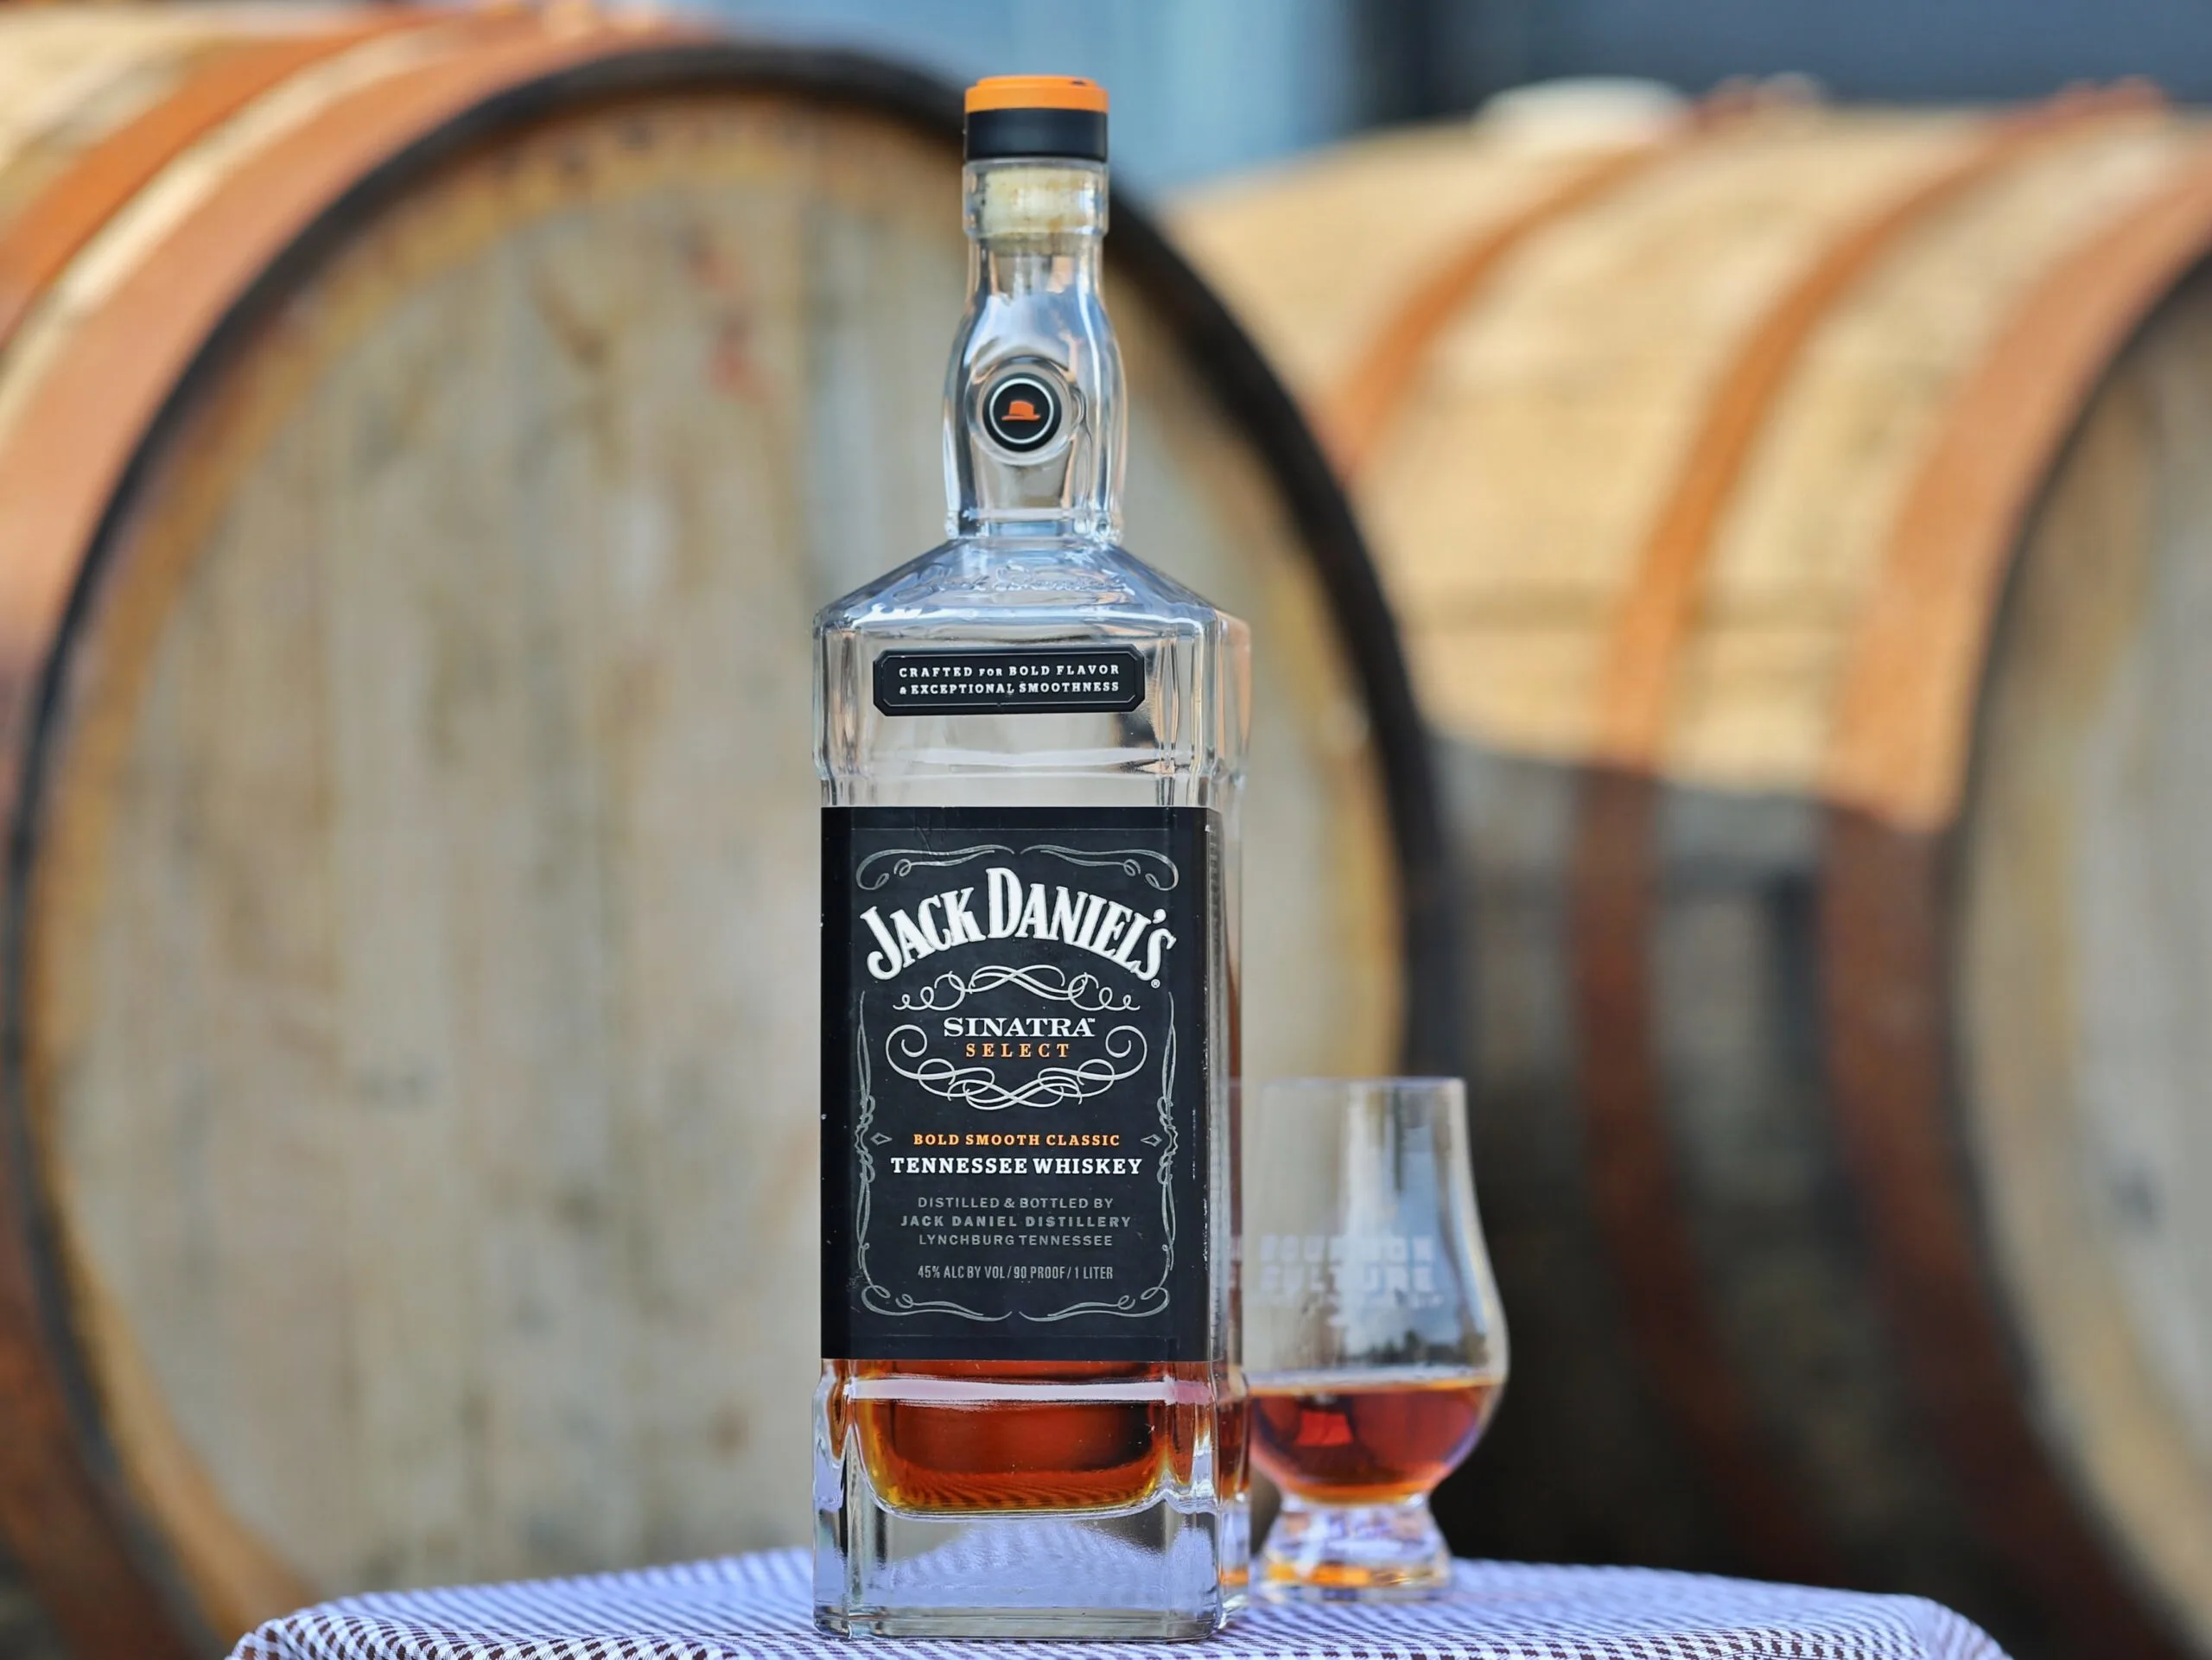 Jack Daniels Alcohol Percentage: Proofing the Iconic Whiskey - Alcohol percentage of Jack Daniels Sinatra Select and limited edition details